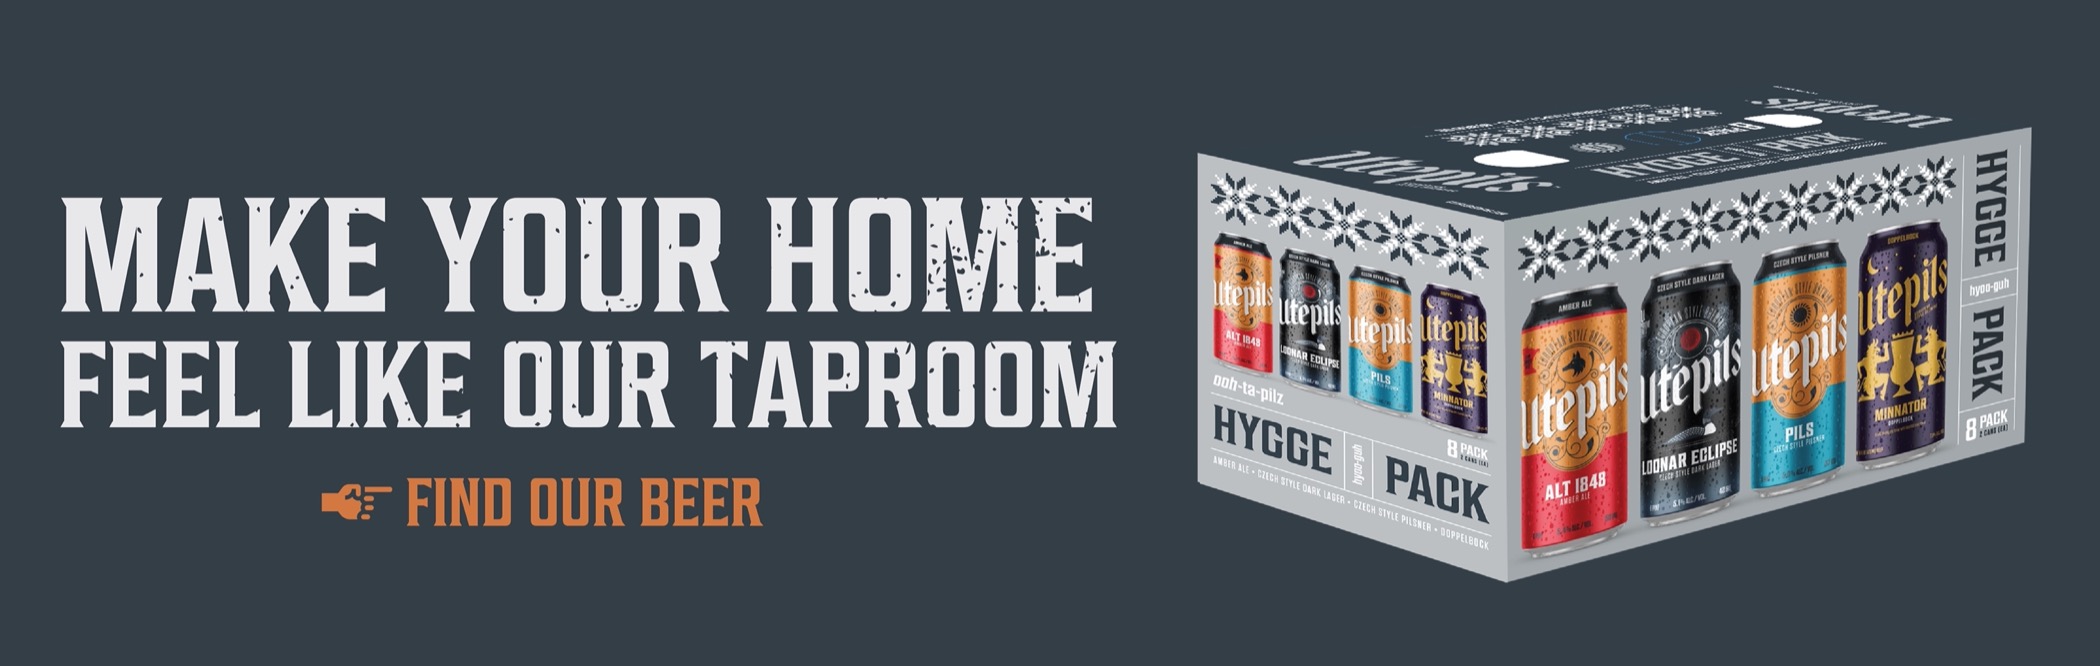 Make Your Home Feel Like Our Taproom